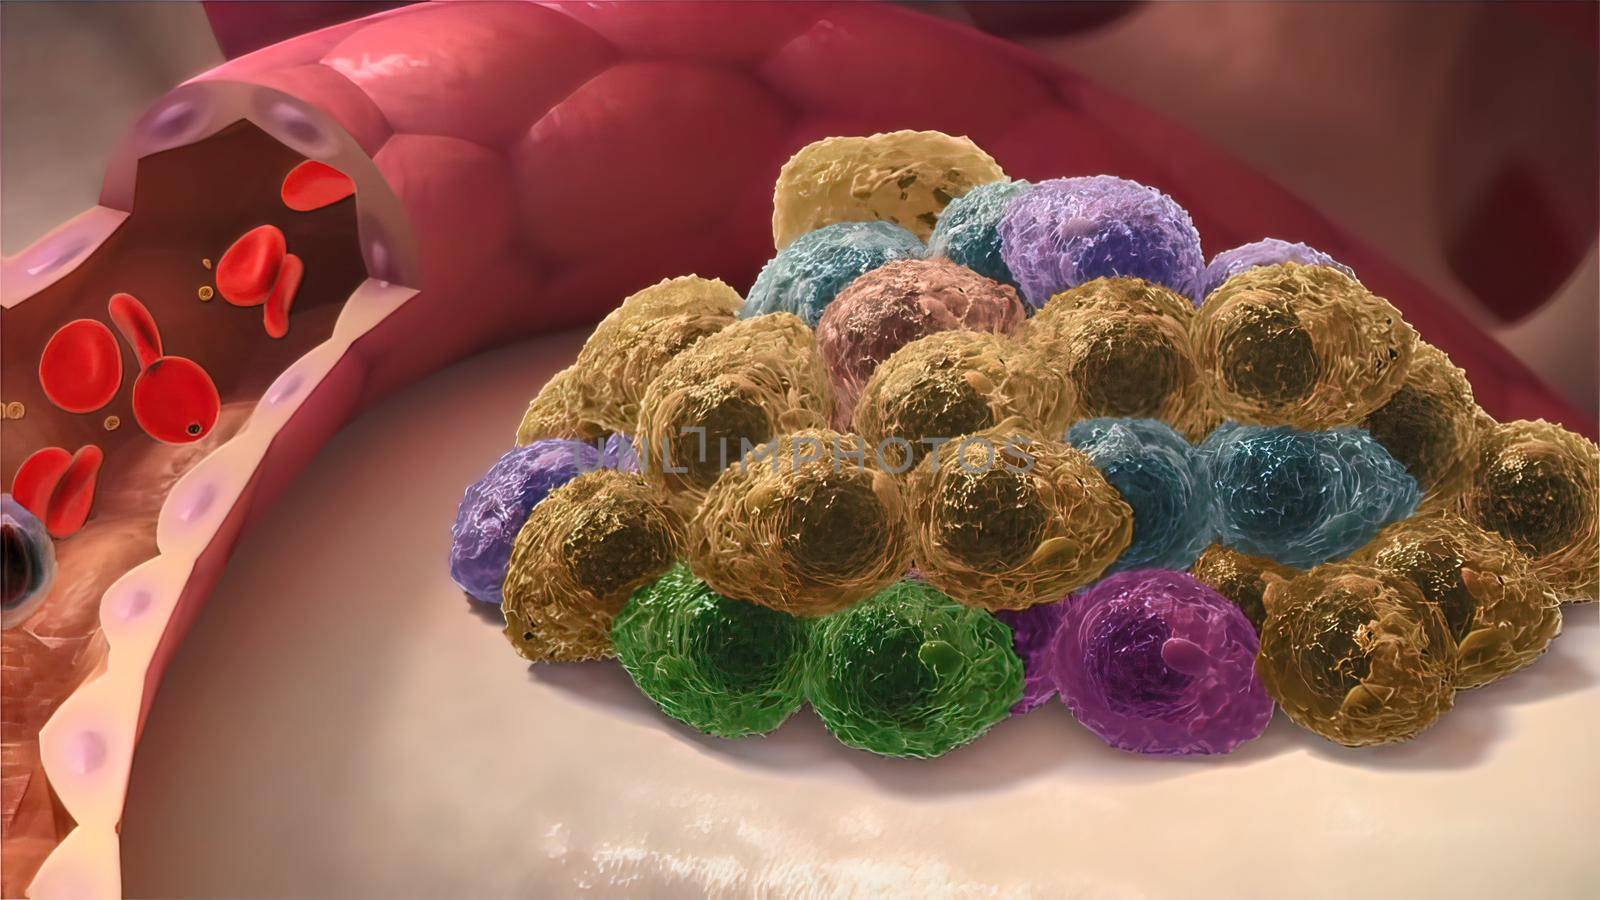 Multiple Myeloma, a type of cancer that consists of white blood cells and its spread. 3D illustration